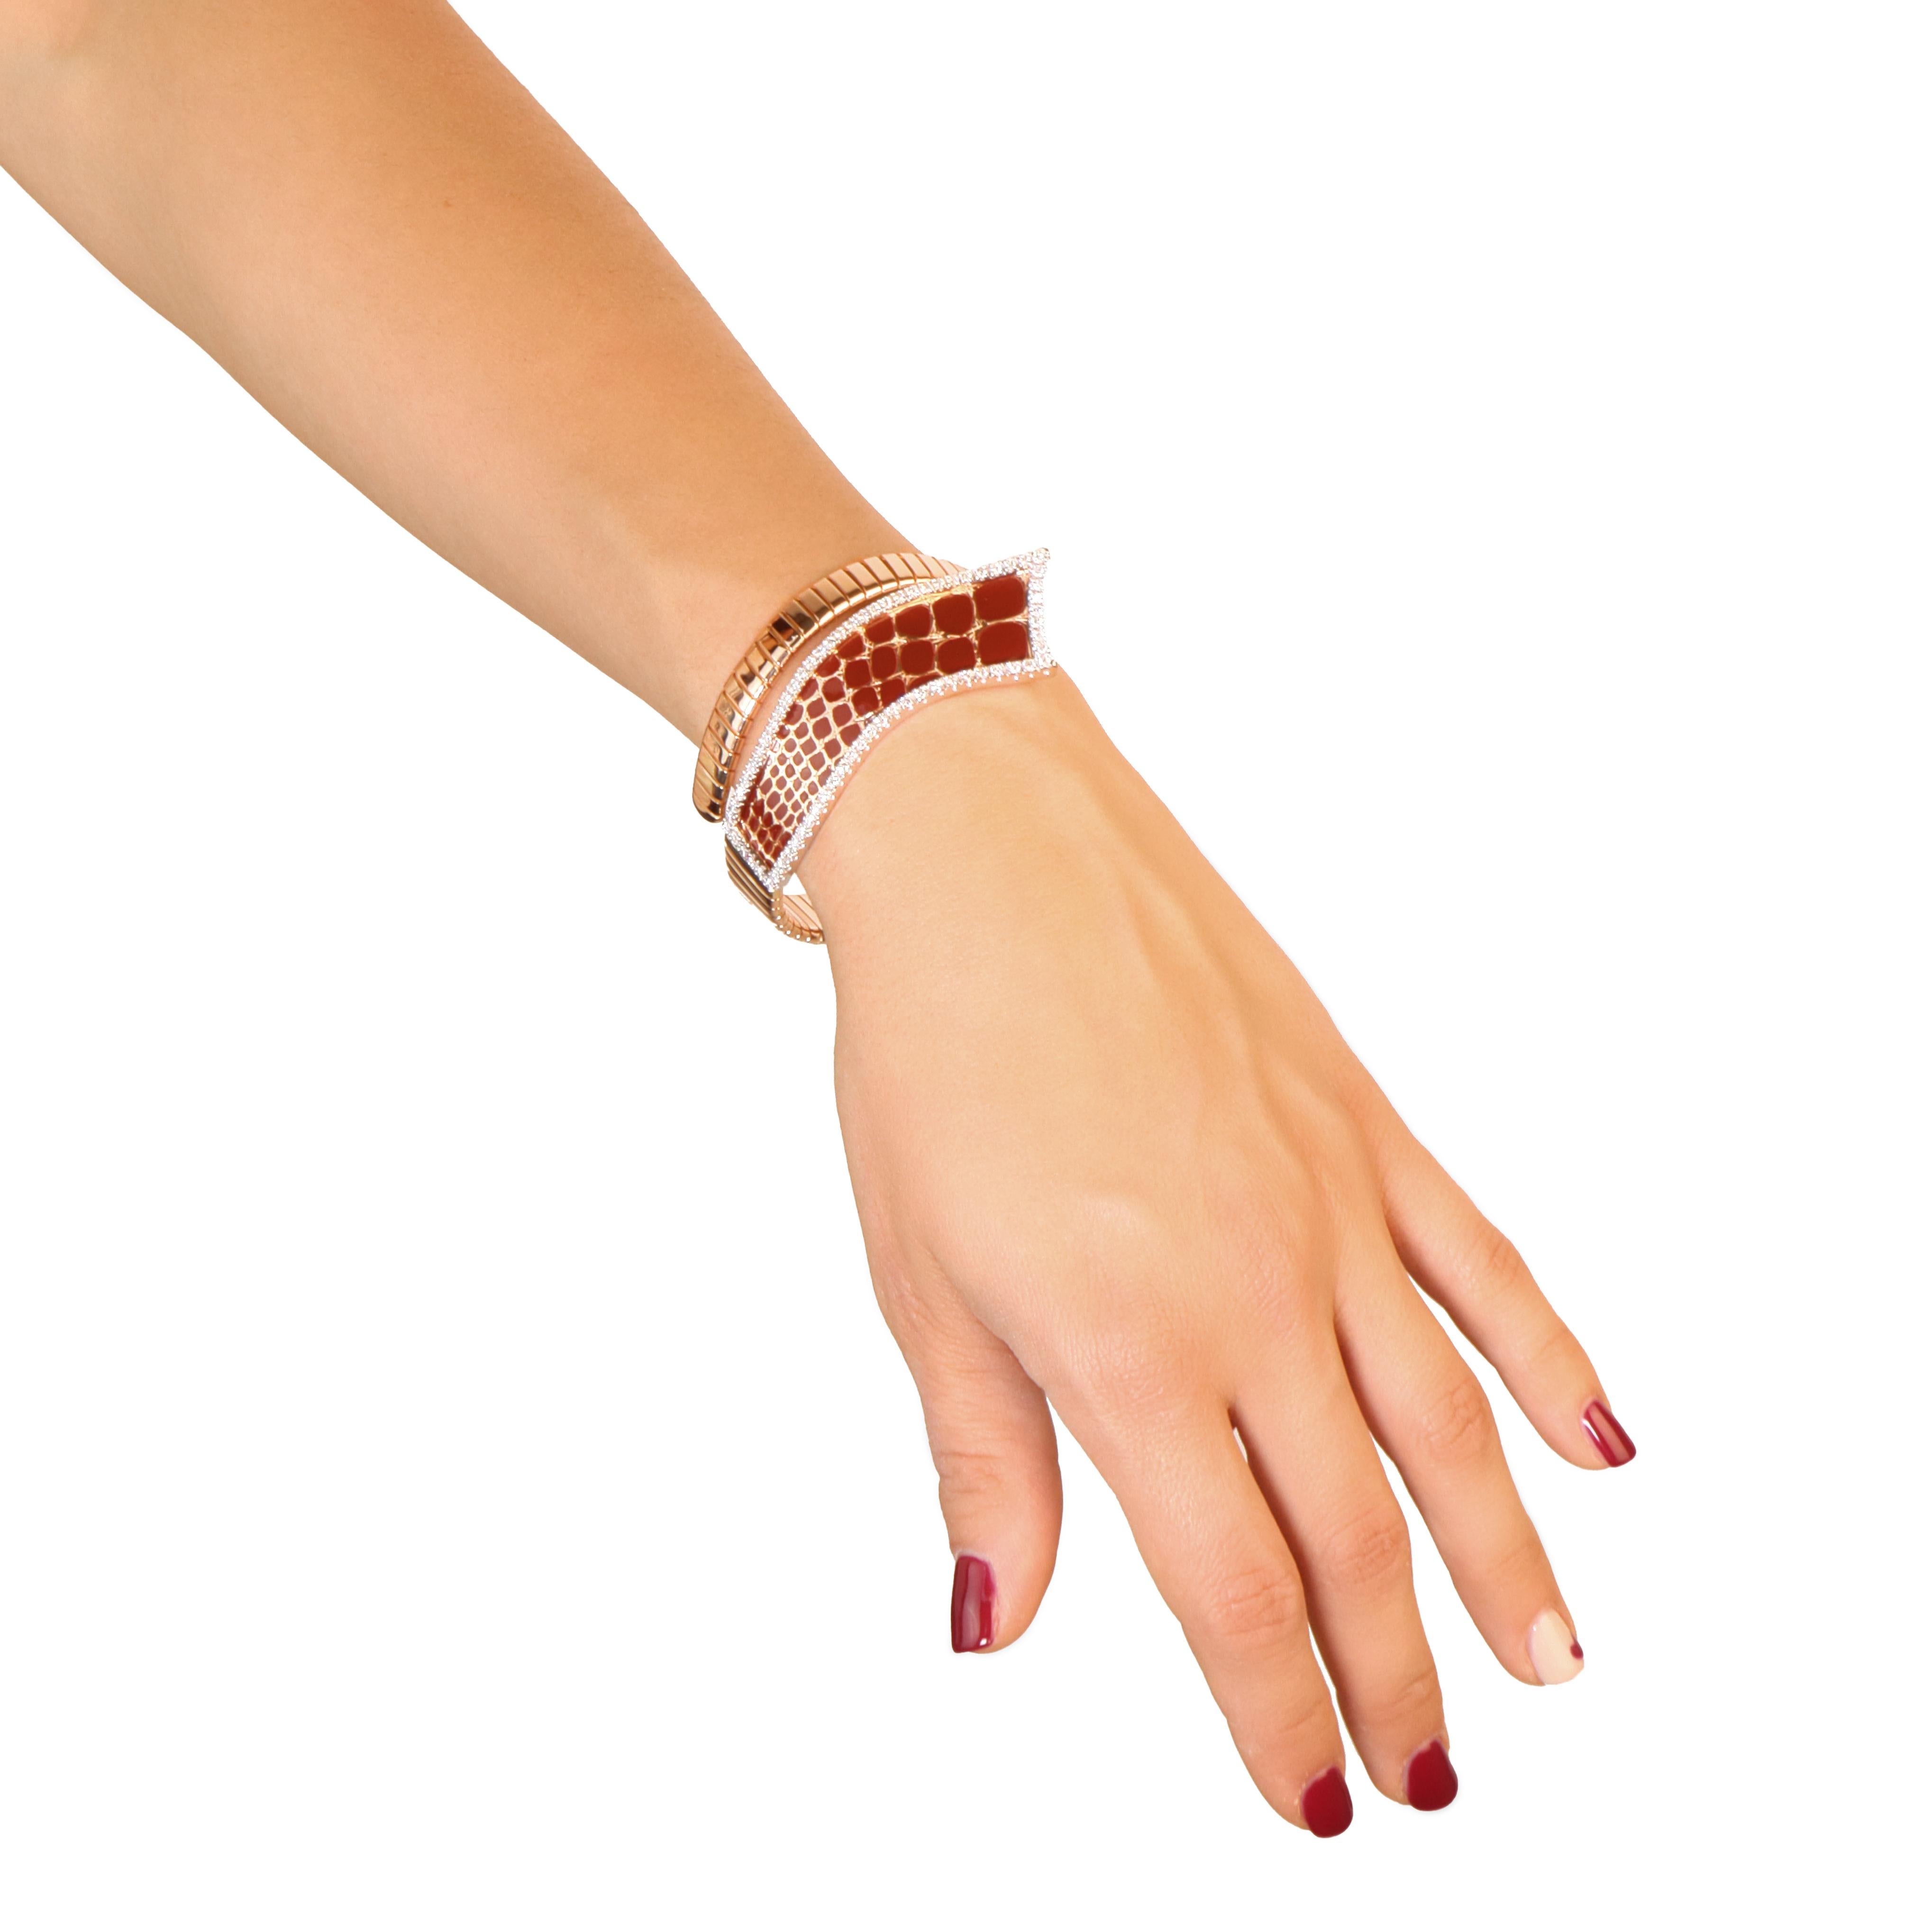 This bangle bracelet represents the perfect mix between tradition and innovation: its retro style recalls the revolutionary design of 1940s bangle bracelets while the modern giraffe print adds a touch of originality to it.
The red-ish enamel is